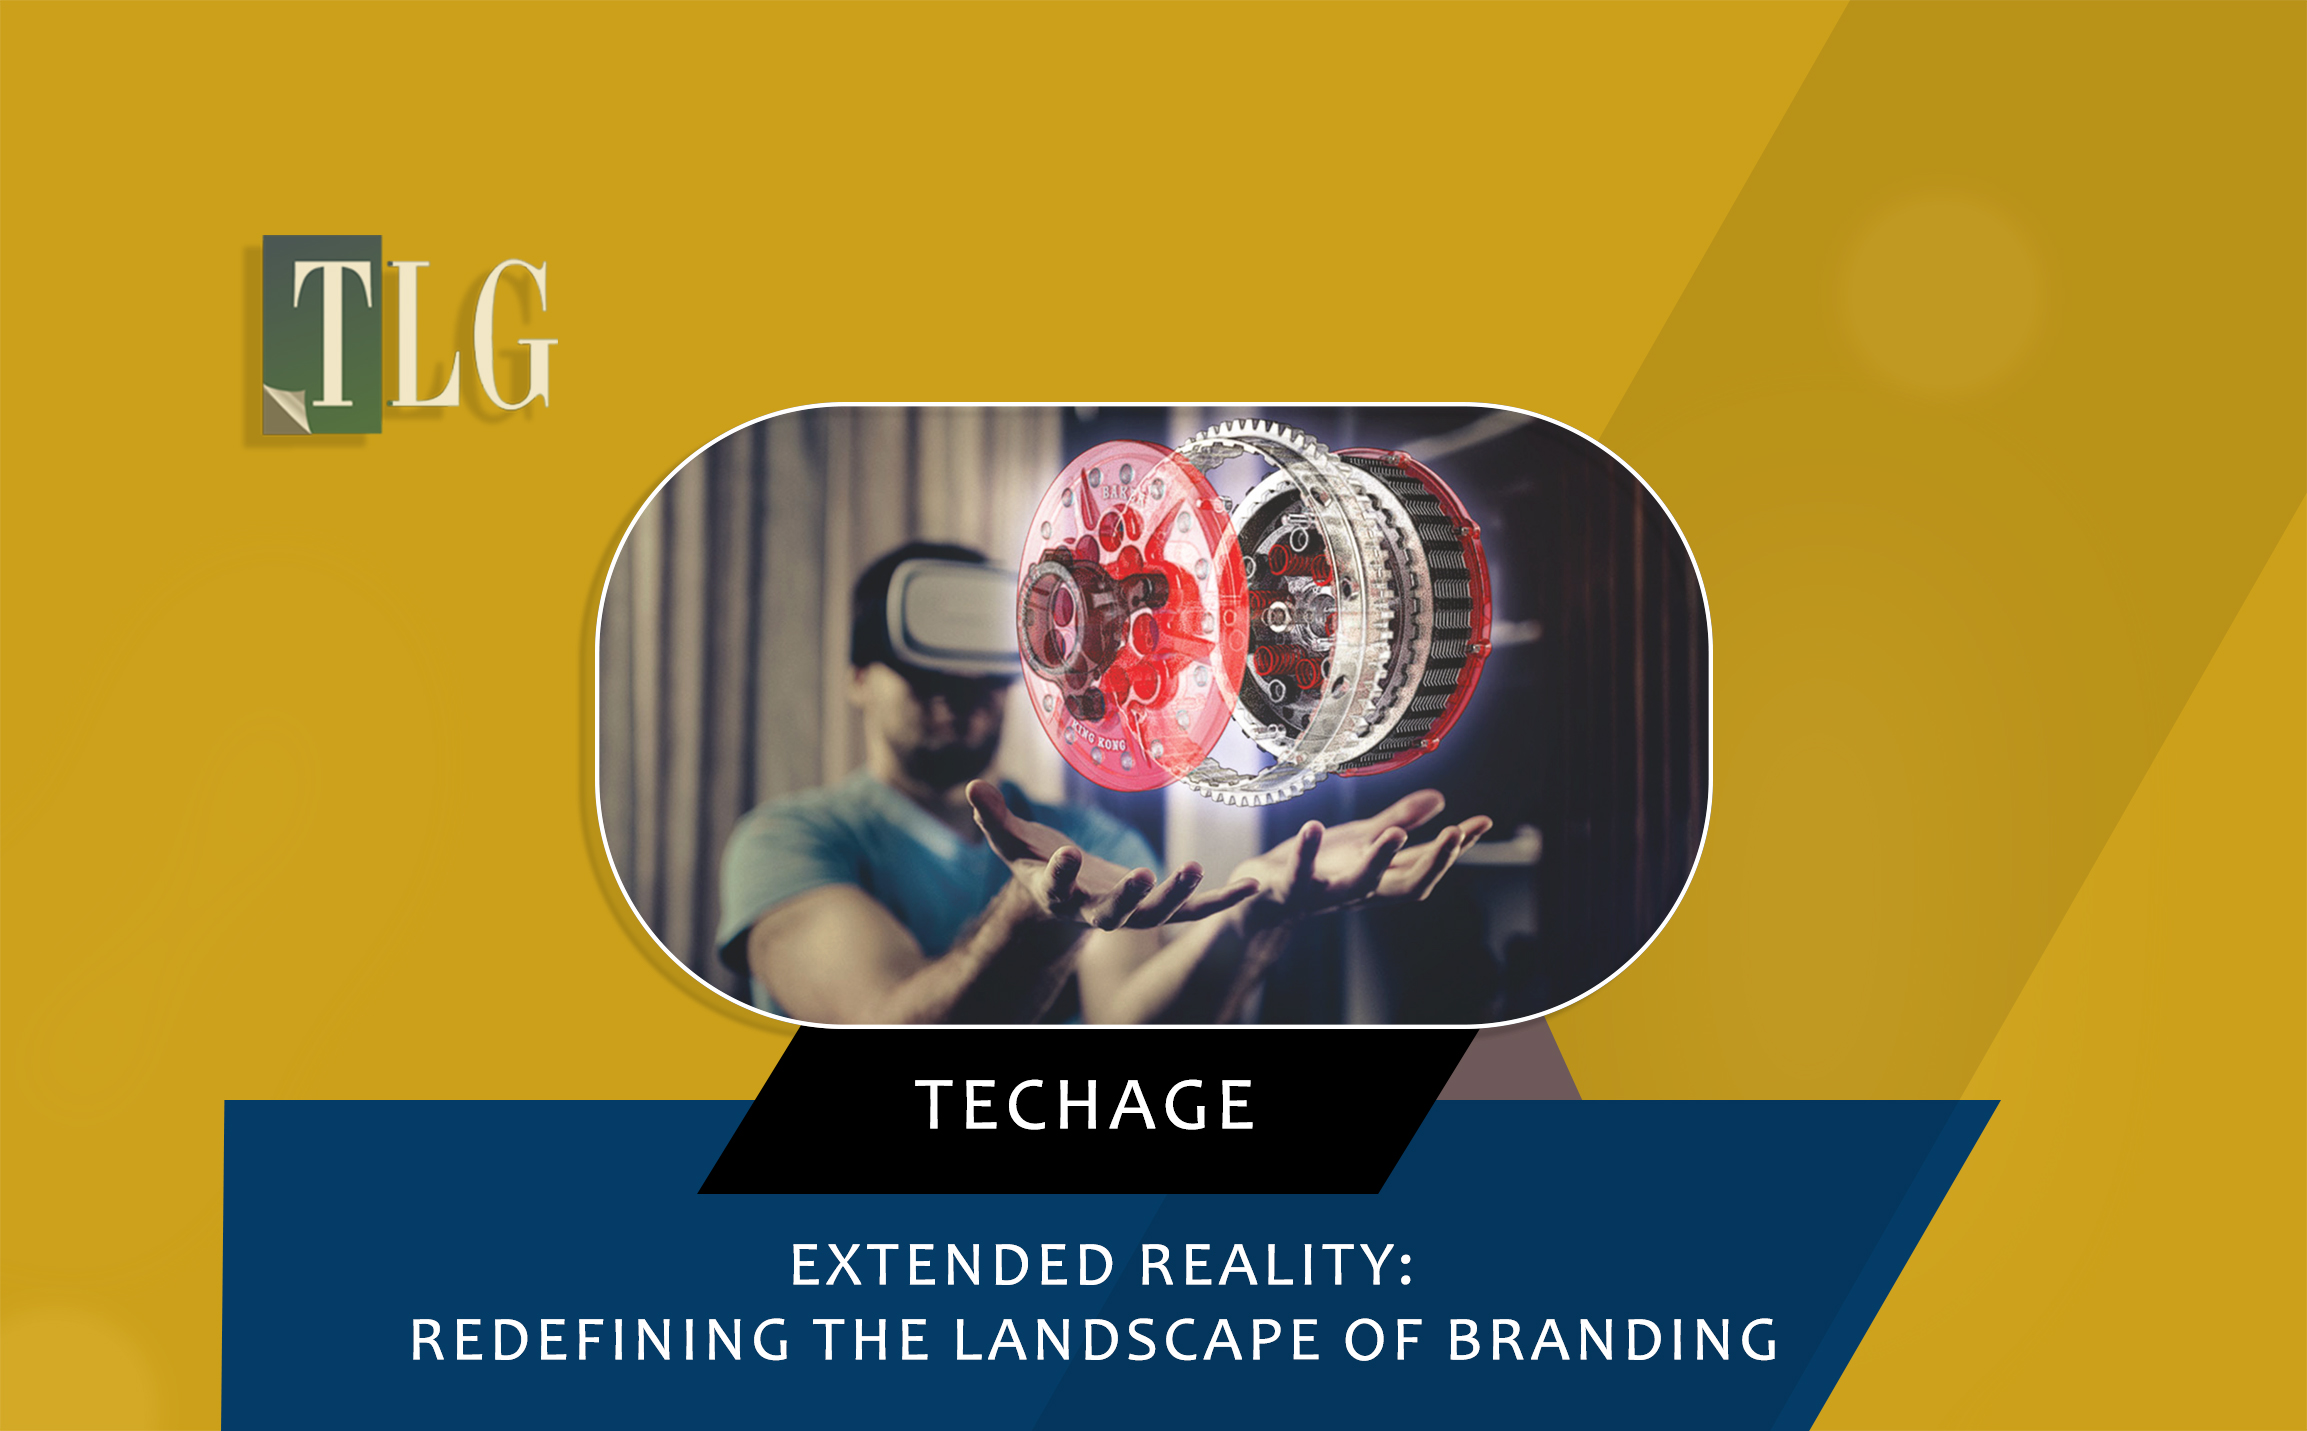 Extended Reality Redefining The Landscape of Branding